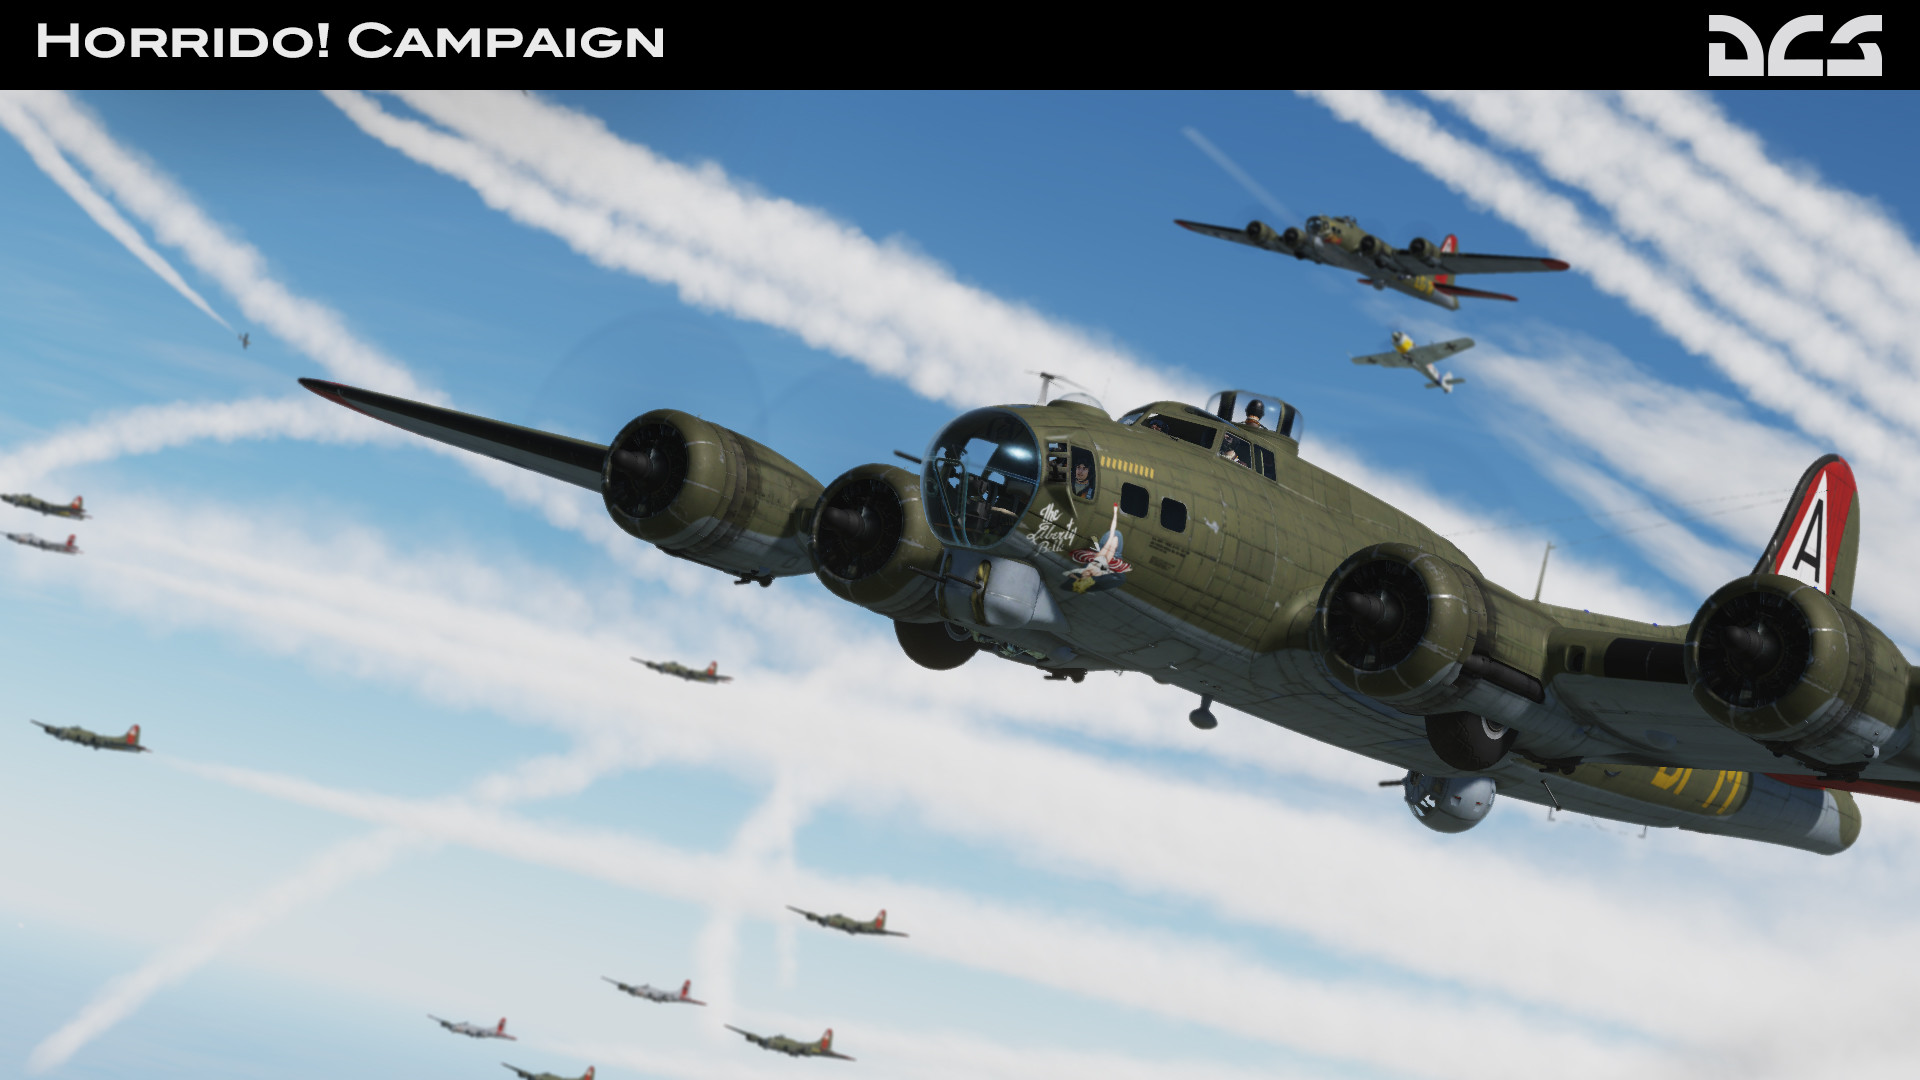 DCS: Fw A-8 Horrido! Steam on Campaign 190